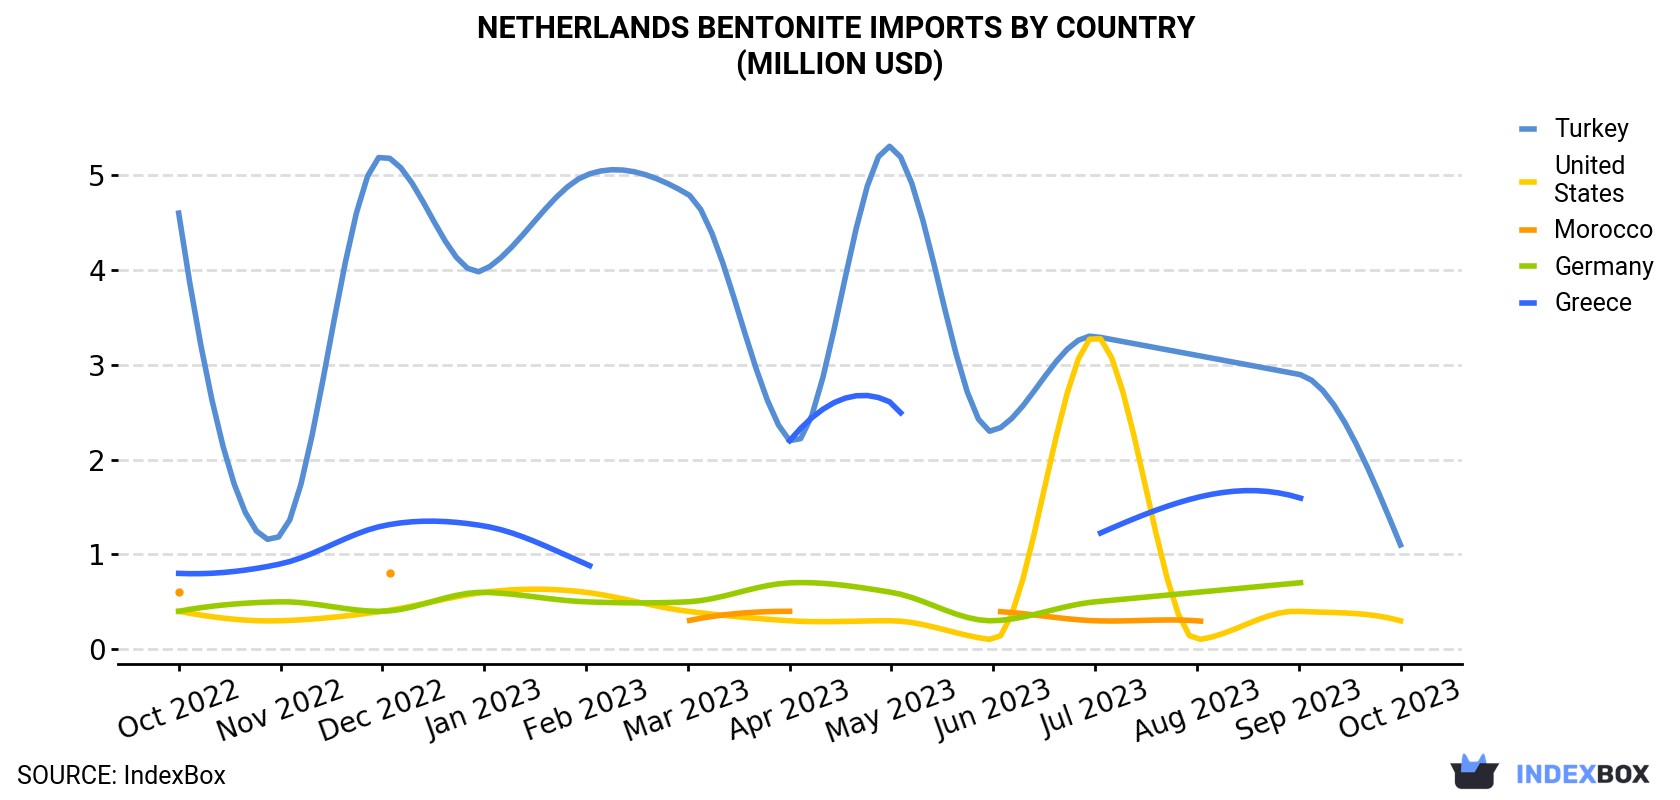 Netherlands Bentonite Imports By Country (Million USD)